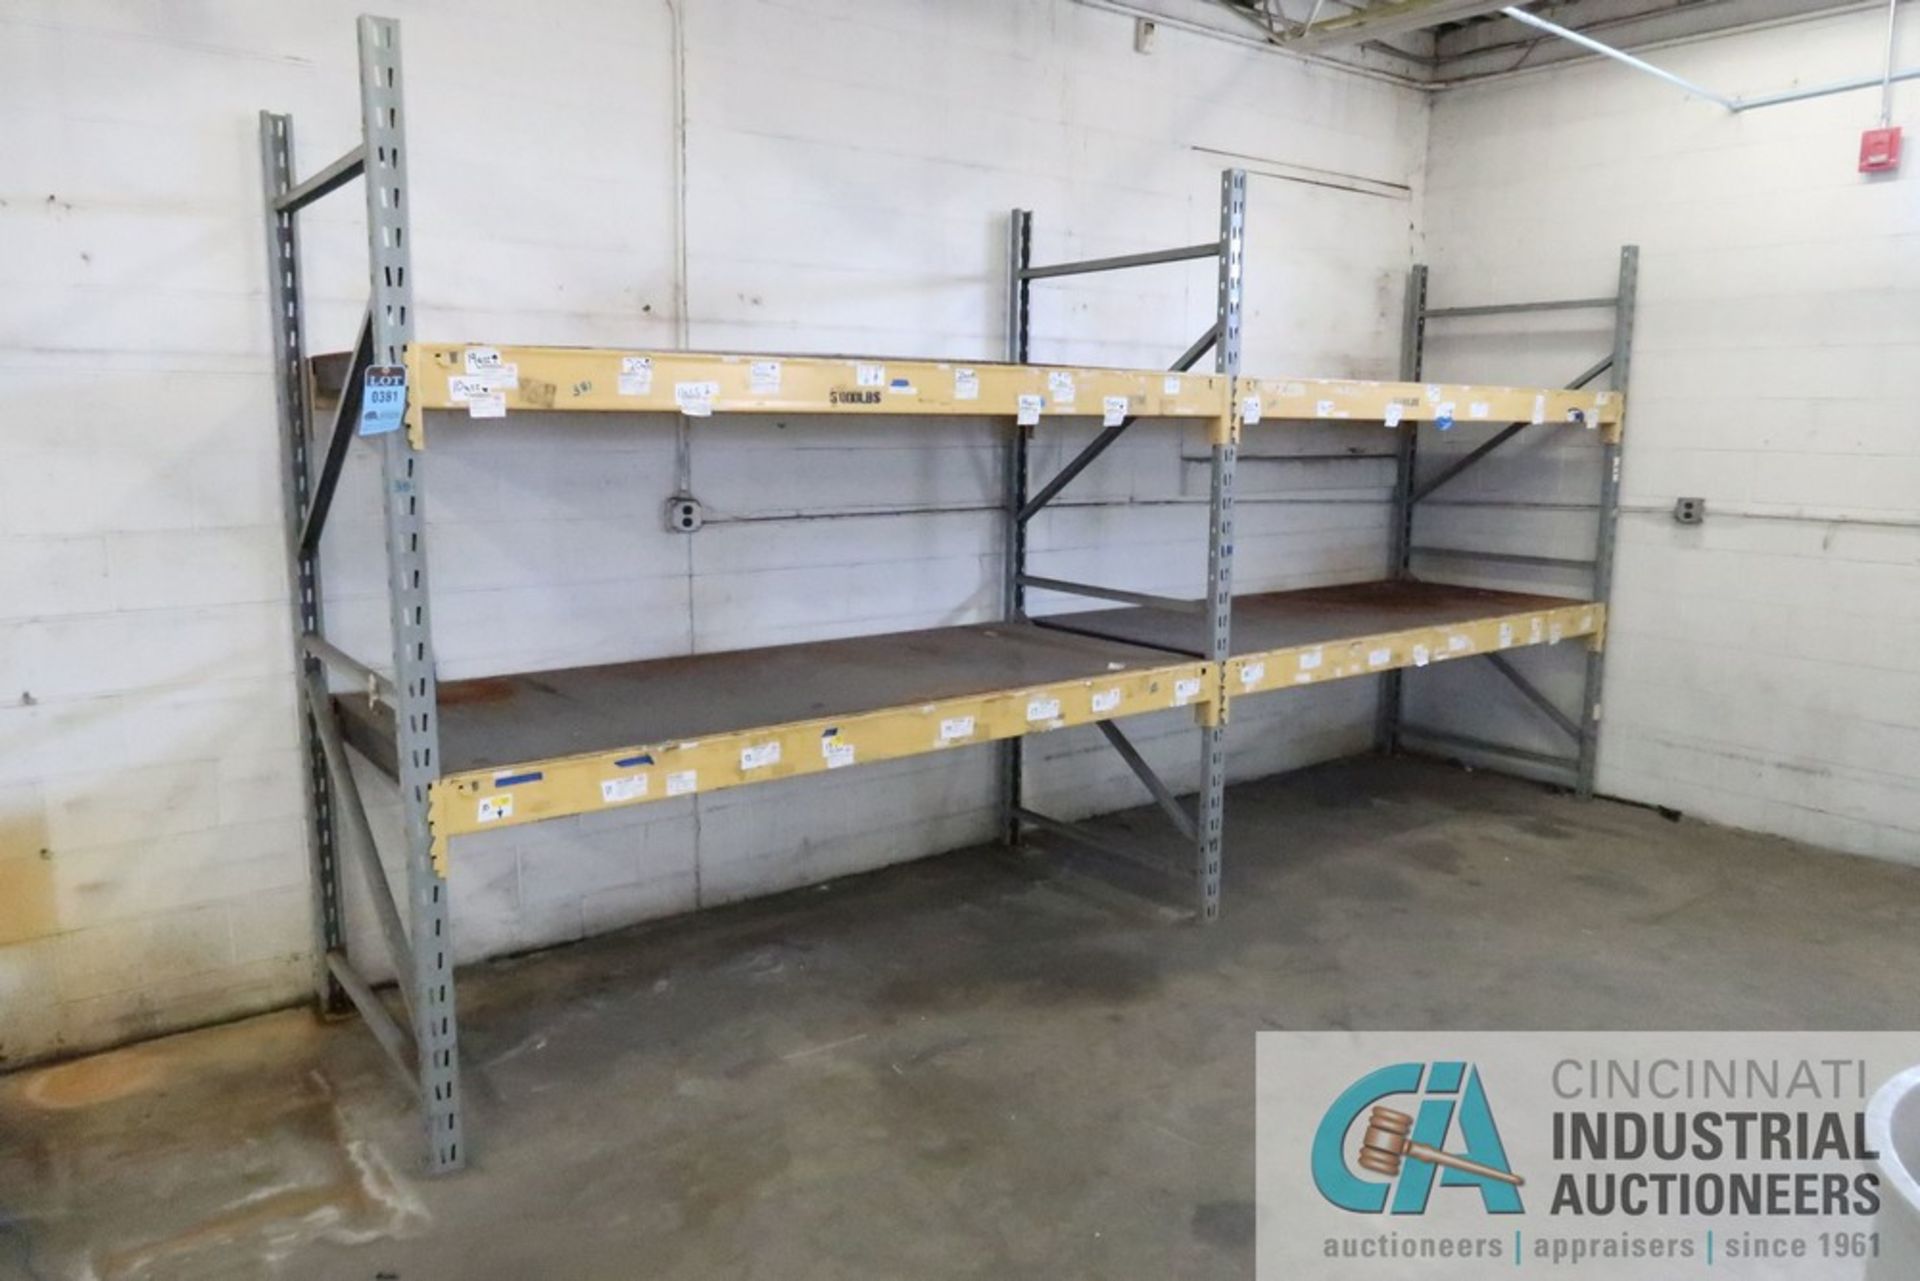 SECTIONS 42" X 96" X 96" HIGH PALLET RACK, (3) UPRIGHTS, (8) 5" FACE CROSS BEAMS, 5,000 LB. 1/8"